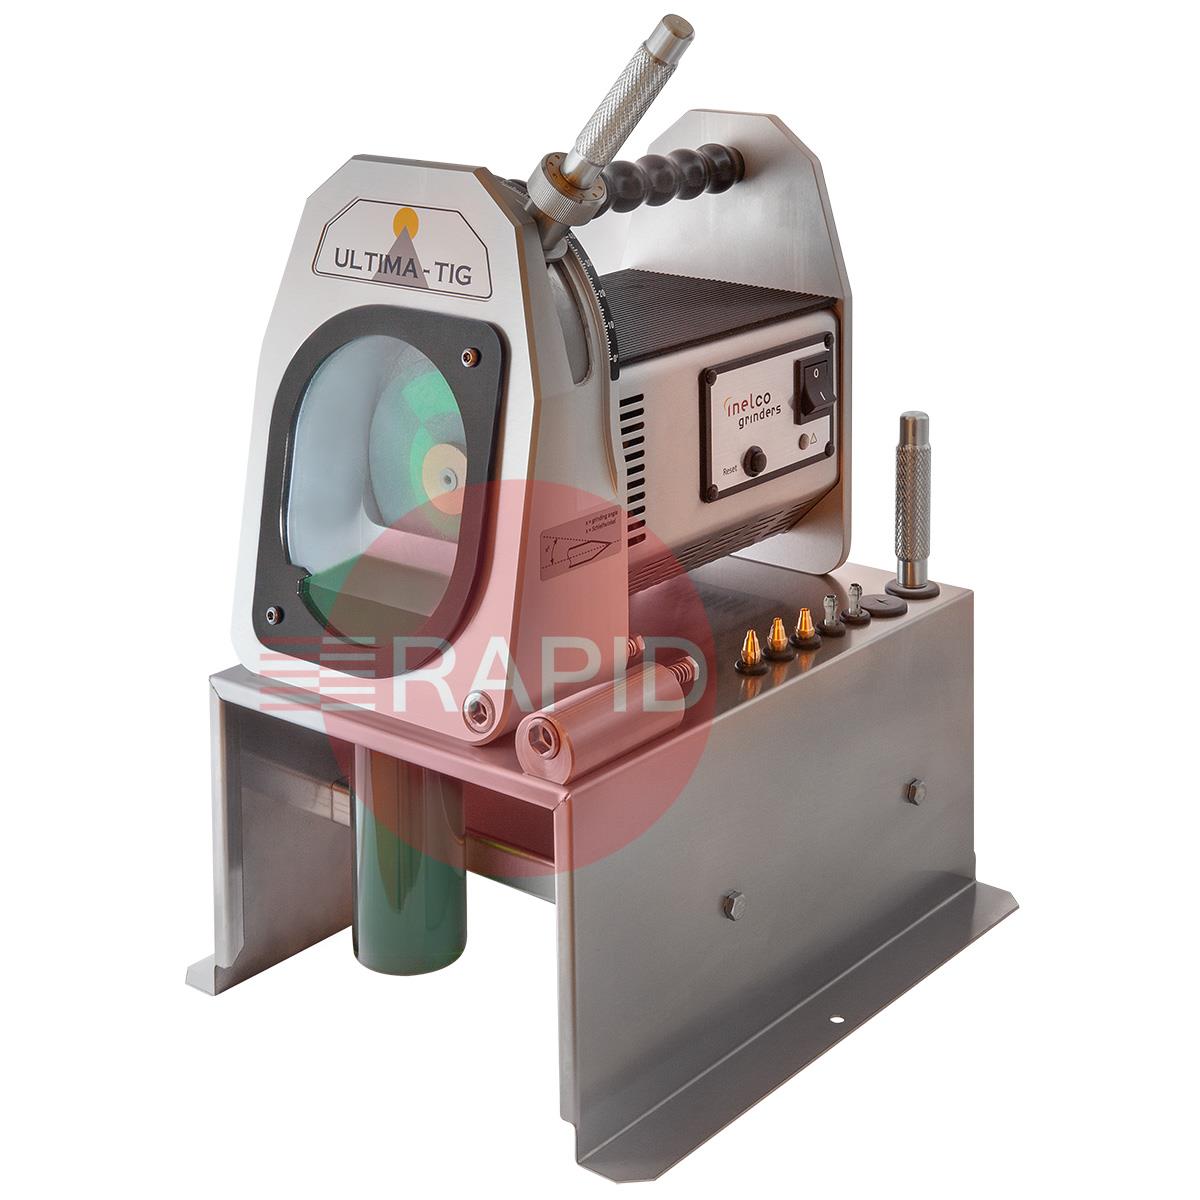 UT3001  Ultima-Tig-S Tungsten Grinder (Up to Ø 8mm). Wet Cutting System Supplied with Grinding Liquid - 110V